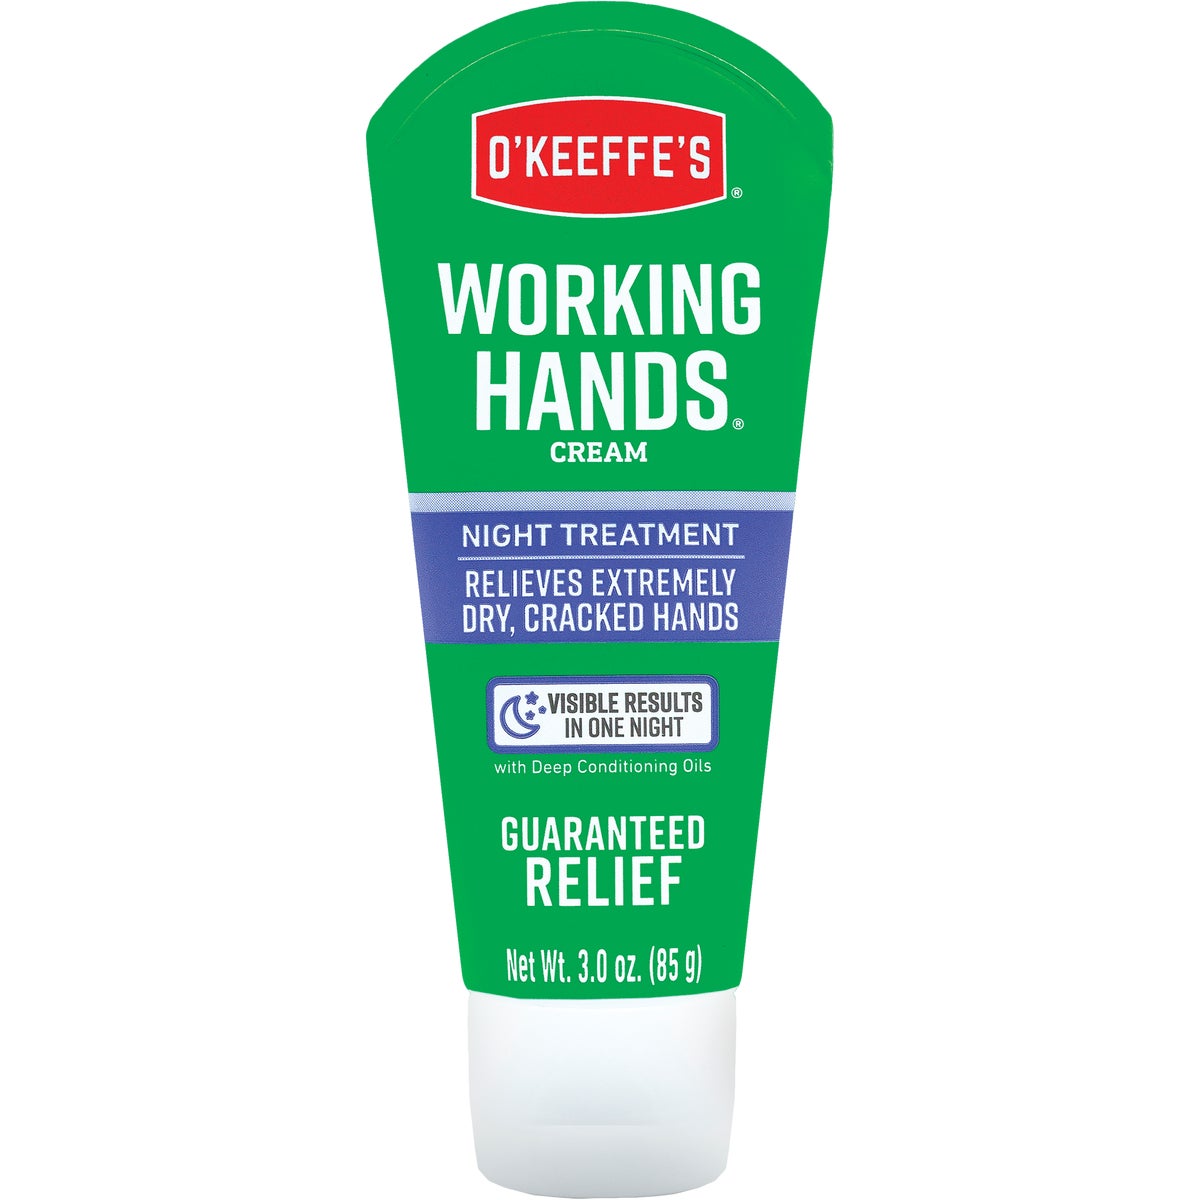 O'Keeffe's Working Hands 3 Oz. Night Treatment Lotion